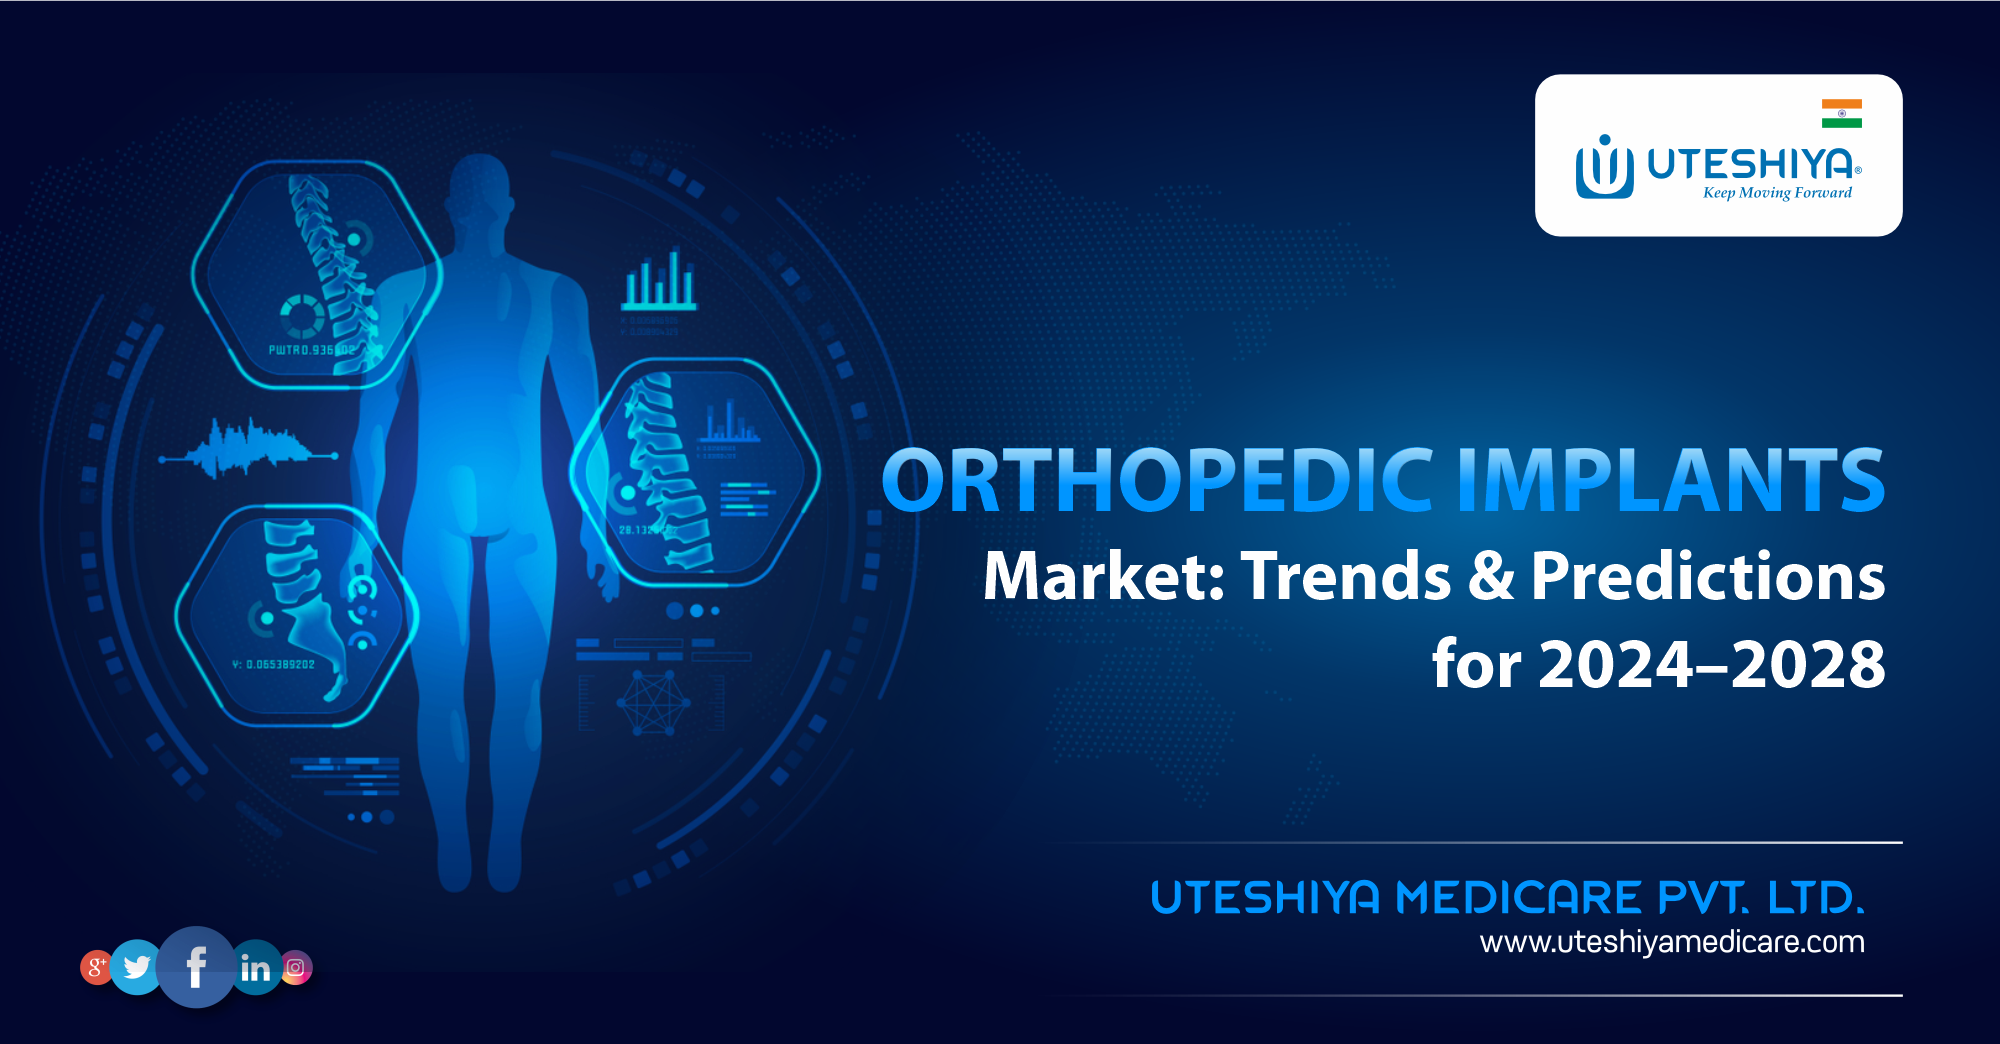 The Orthopedic Implants Market Trends and Predictions for 2024–2028